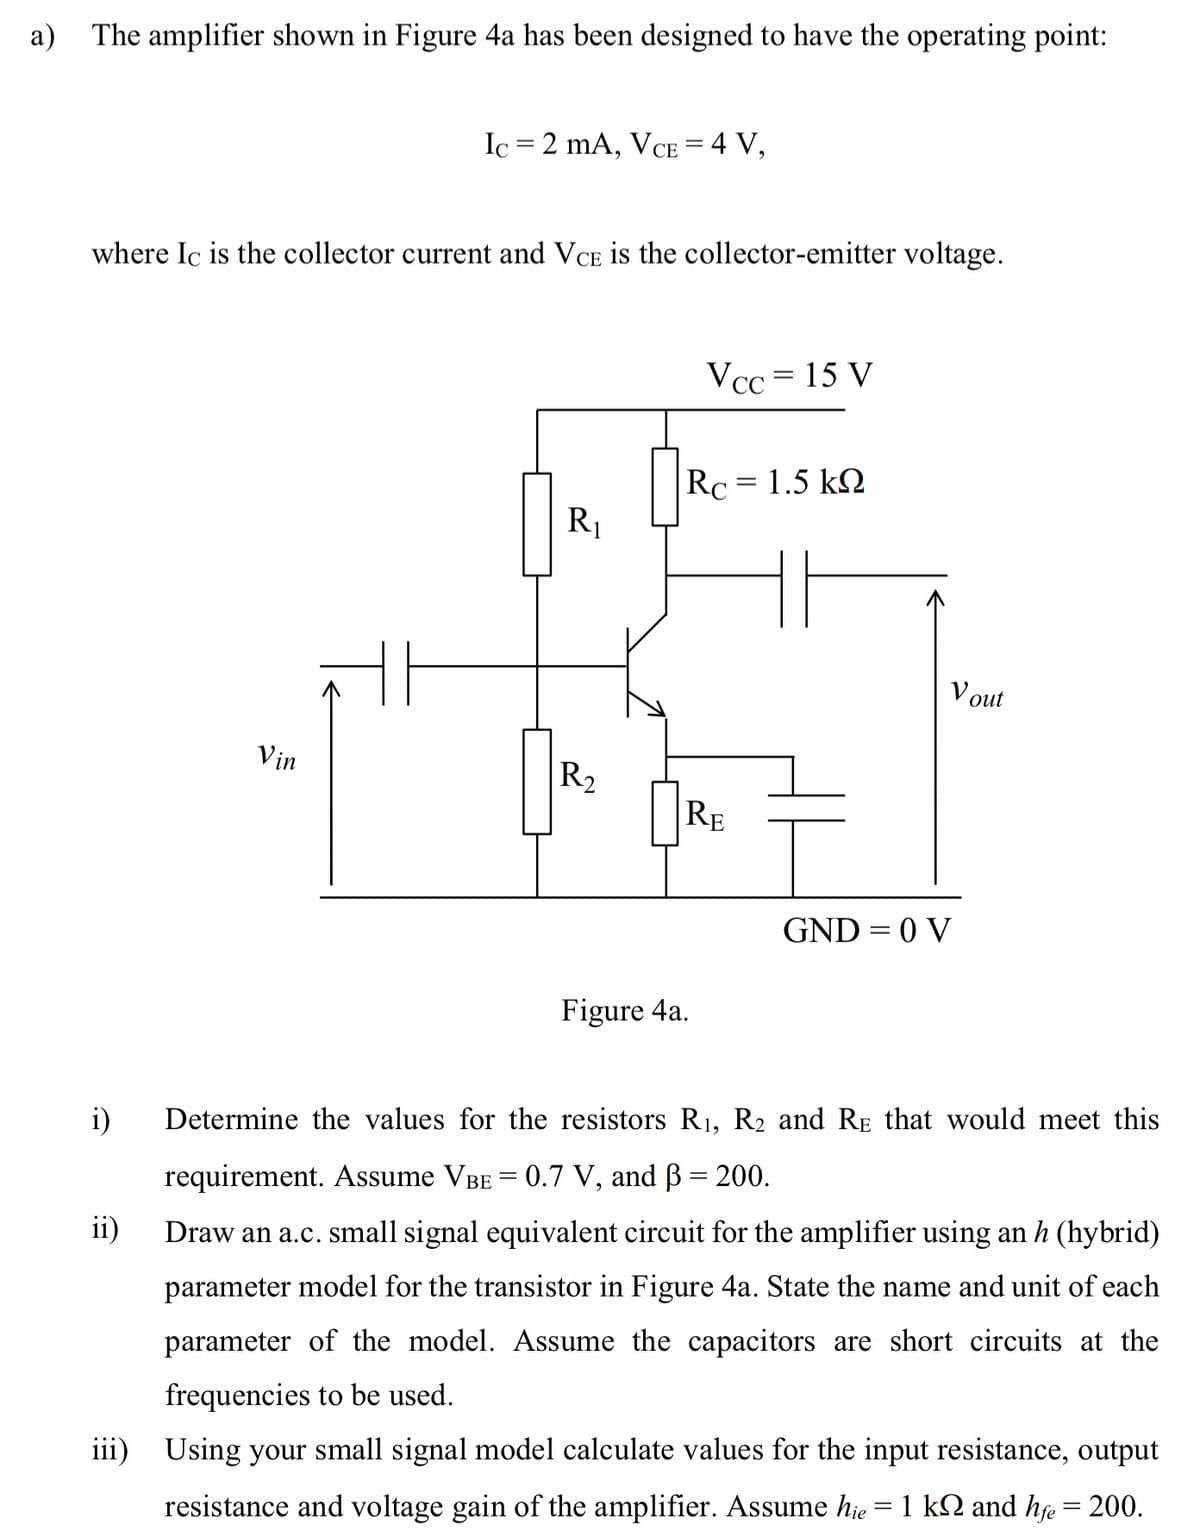 a) The amplifier shown in Figure 4a has been designed to have the operating point:
Ic = 2 mA, VCE = 4 V,
where Ic is the collector current and VCE is the collector-emitter voltage.
Vcc = 15 V
Rc = 1.5 k2
R1
V out
Vin
R2
RE
GND = 0 V
Figure 4a.
i)
Determine the values for the resistors R1, R2 and RE that would meet this
requirement. ASsume VBE = 0.7 V, and B = 200.
ii)
Draw an a.c. small signal equivalent circuit for the amplifier using an h (hybrid)
parameter model for the transistor in Figure 4a. State the name and unit of each
parameter of the model. Assume the capacitors are short circuits at the
frequencies to be used.
iii) Using your small signal model calculate values for the input resistance, output
resistance and voltage gain of the amplifier. Assume hje = 1 k2 and hfe = 200.
